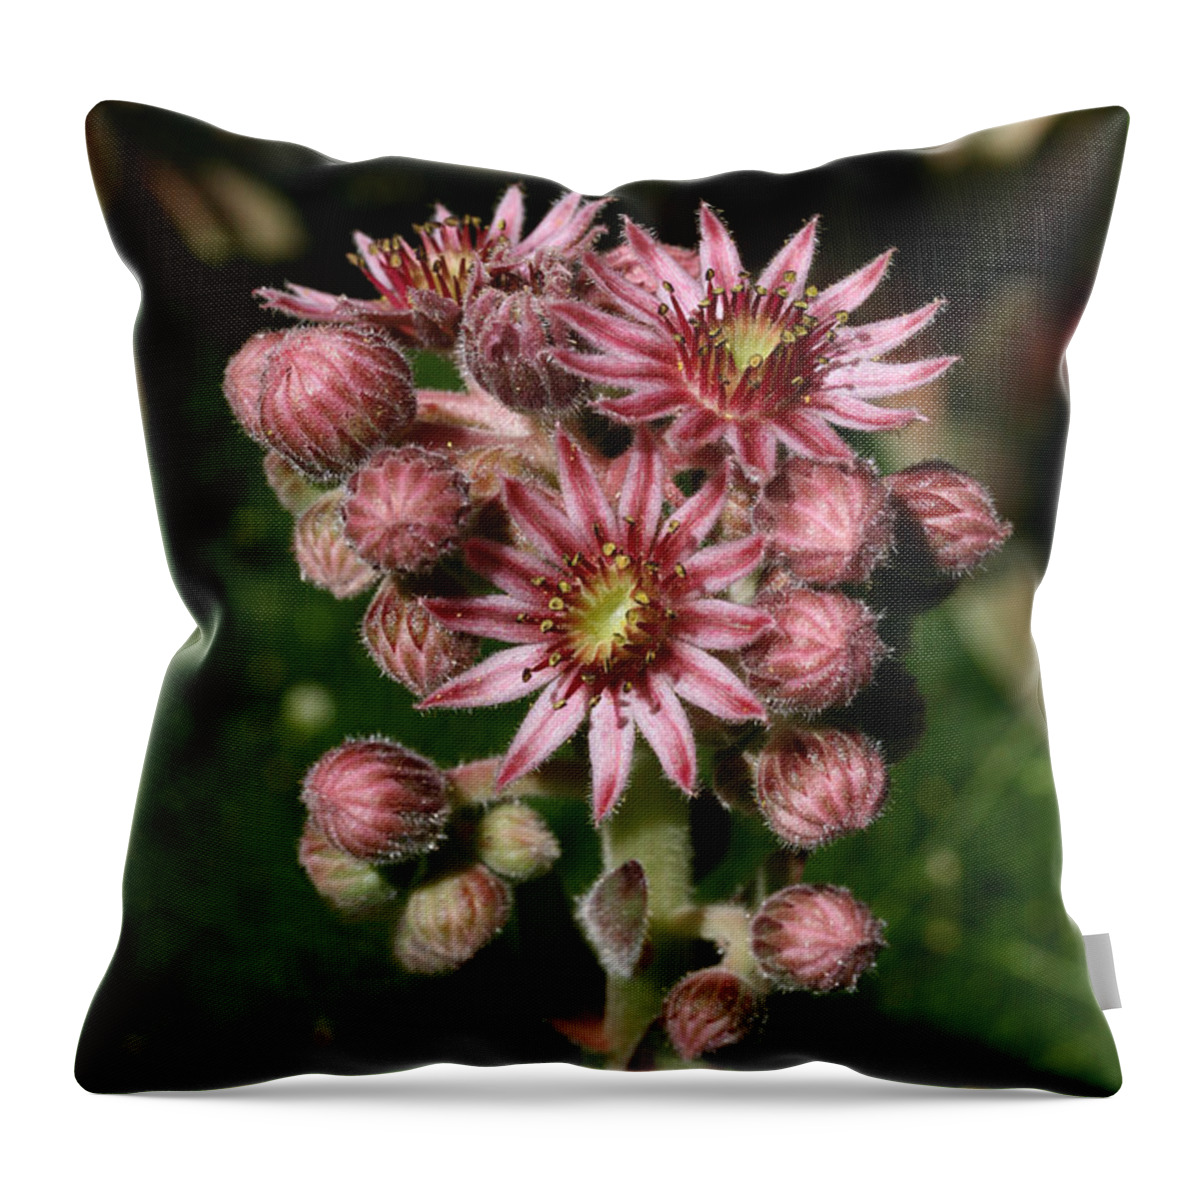 Cranberry Throw Pillow featuring the photograph Cranberry Delight by Tammy Pool